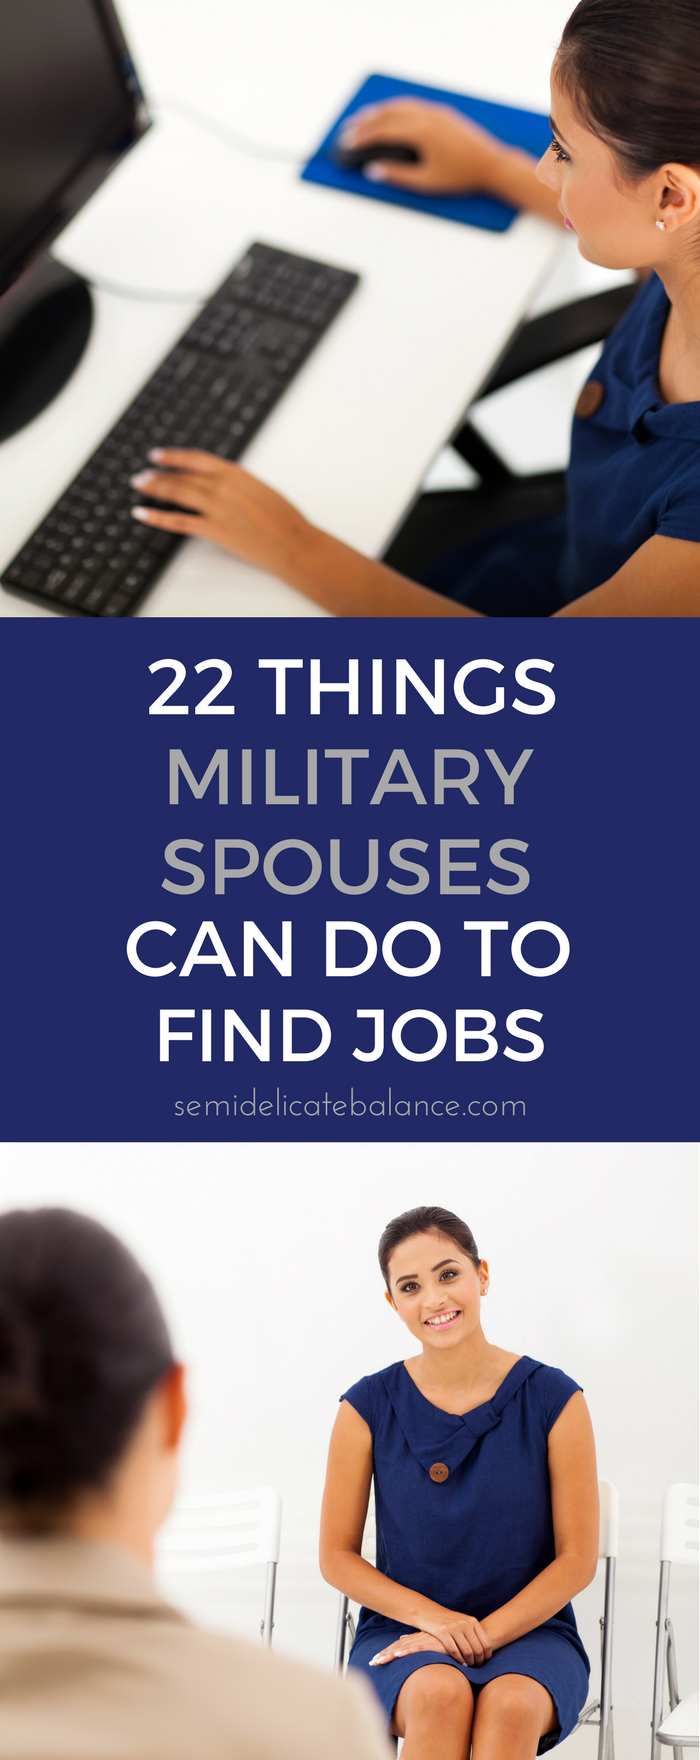 Military Spouses Can Do to Find Jobs